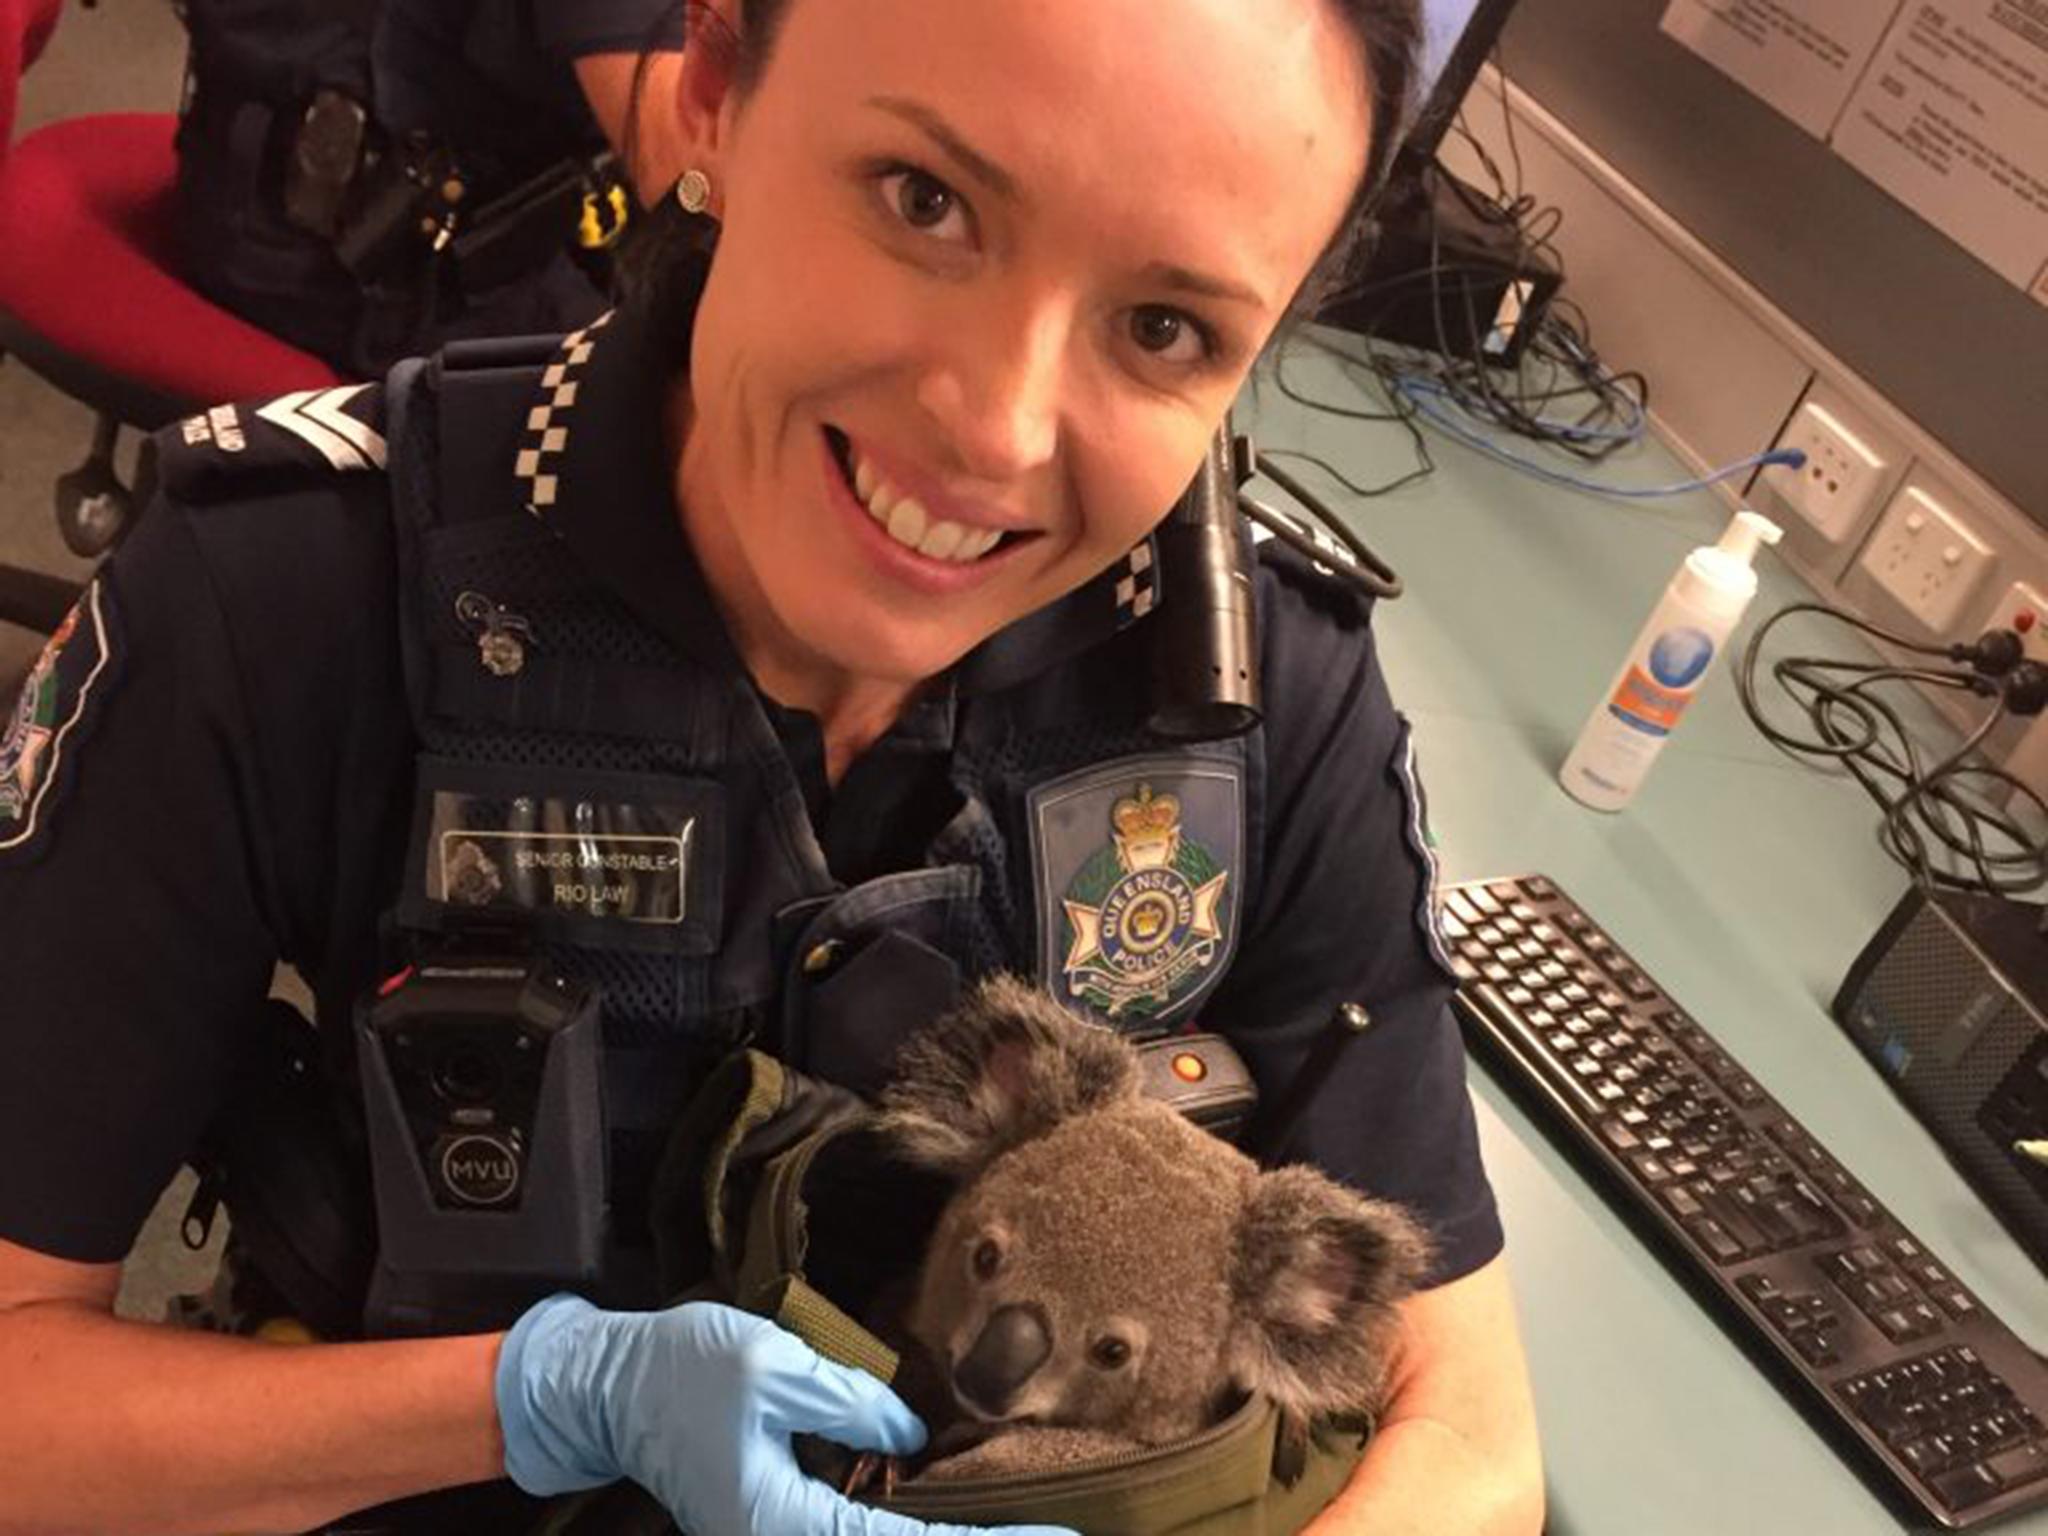 The RSPCA has named the joey Alfred